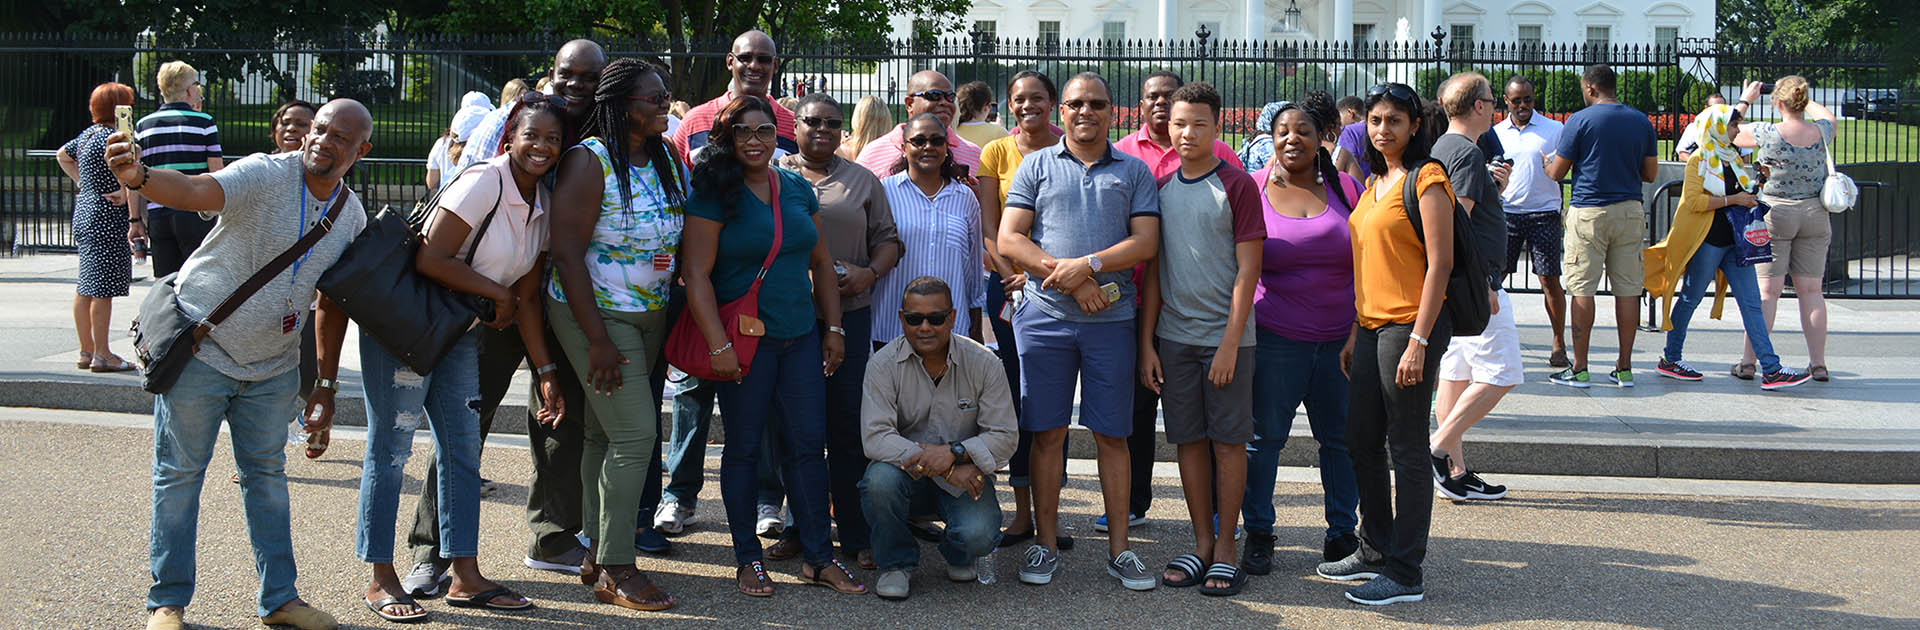 WJPC participants in front of tthe White House during a tour of Washington, DC